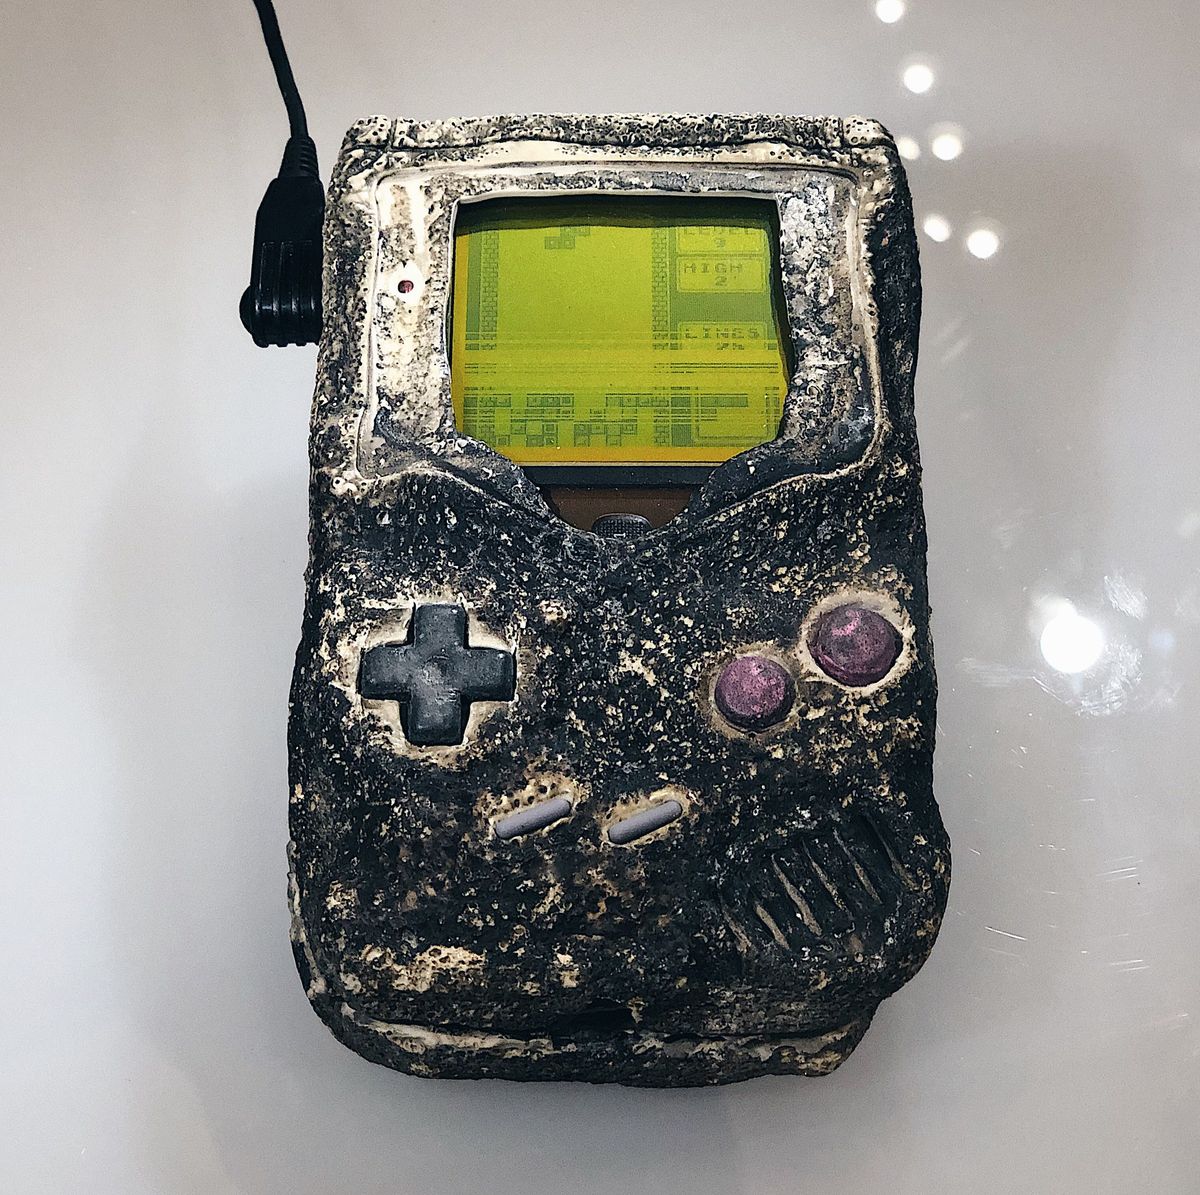 This Nintendo Game Boy Survived a in the War